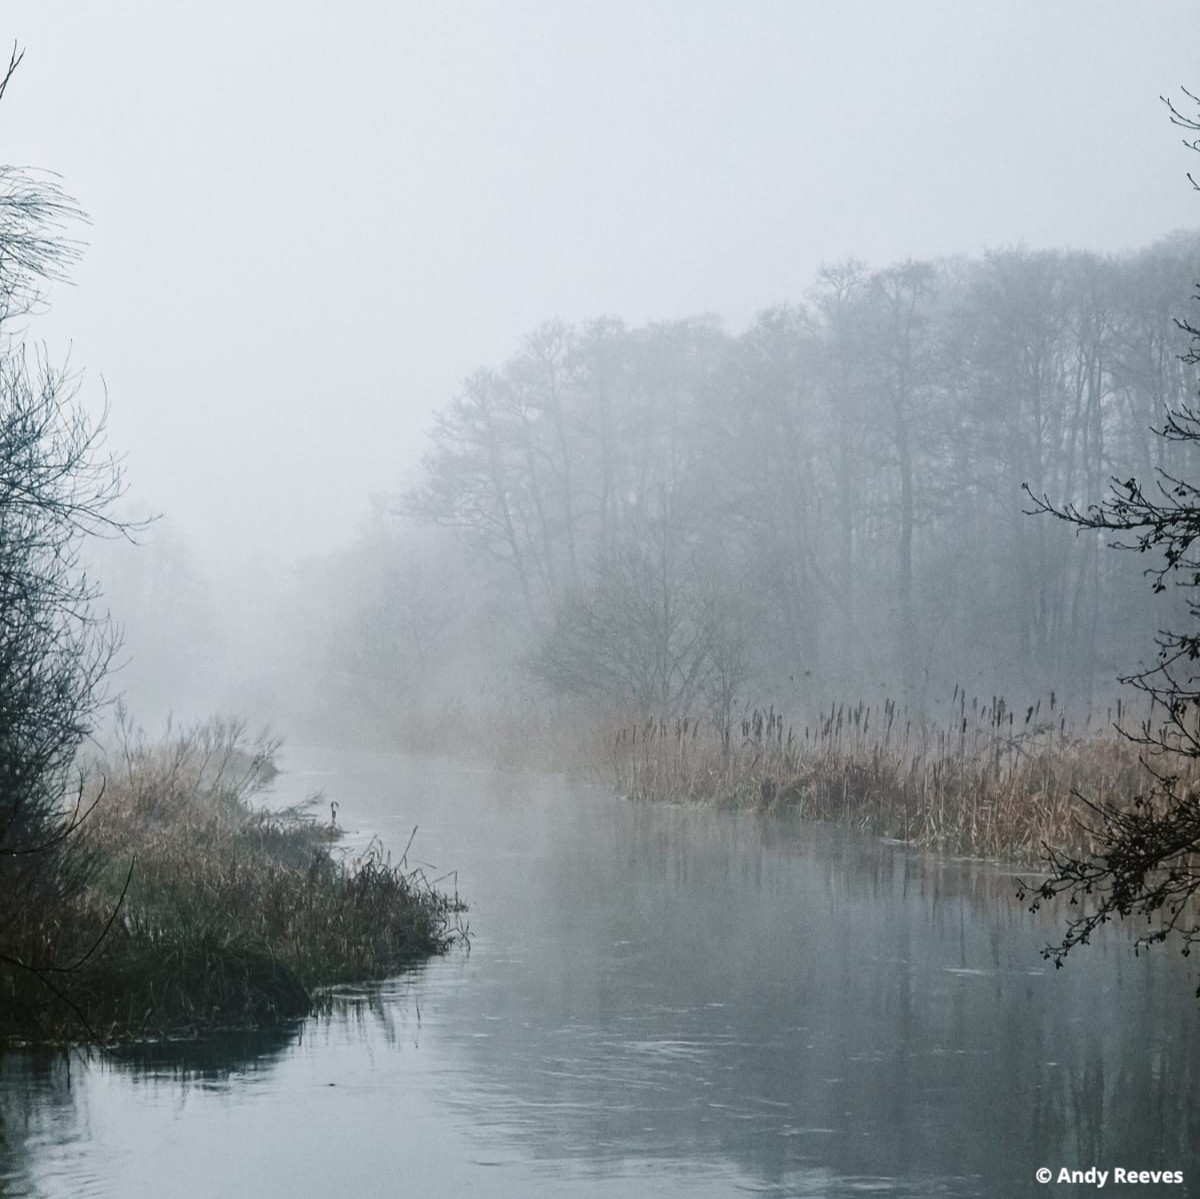 Winnall Moors Wildlife Trust Nature Reserve looking earie back in early March on a misty morning. Spanning 64 hectares of natural floodplain, Winnall Moors is a peaceful city centre oasis, with a diverse range of wildlife including kingfisher, reed warblers and water voles.